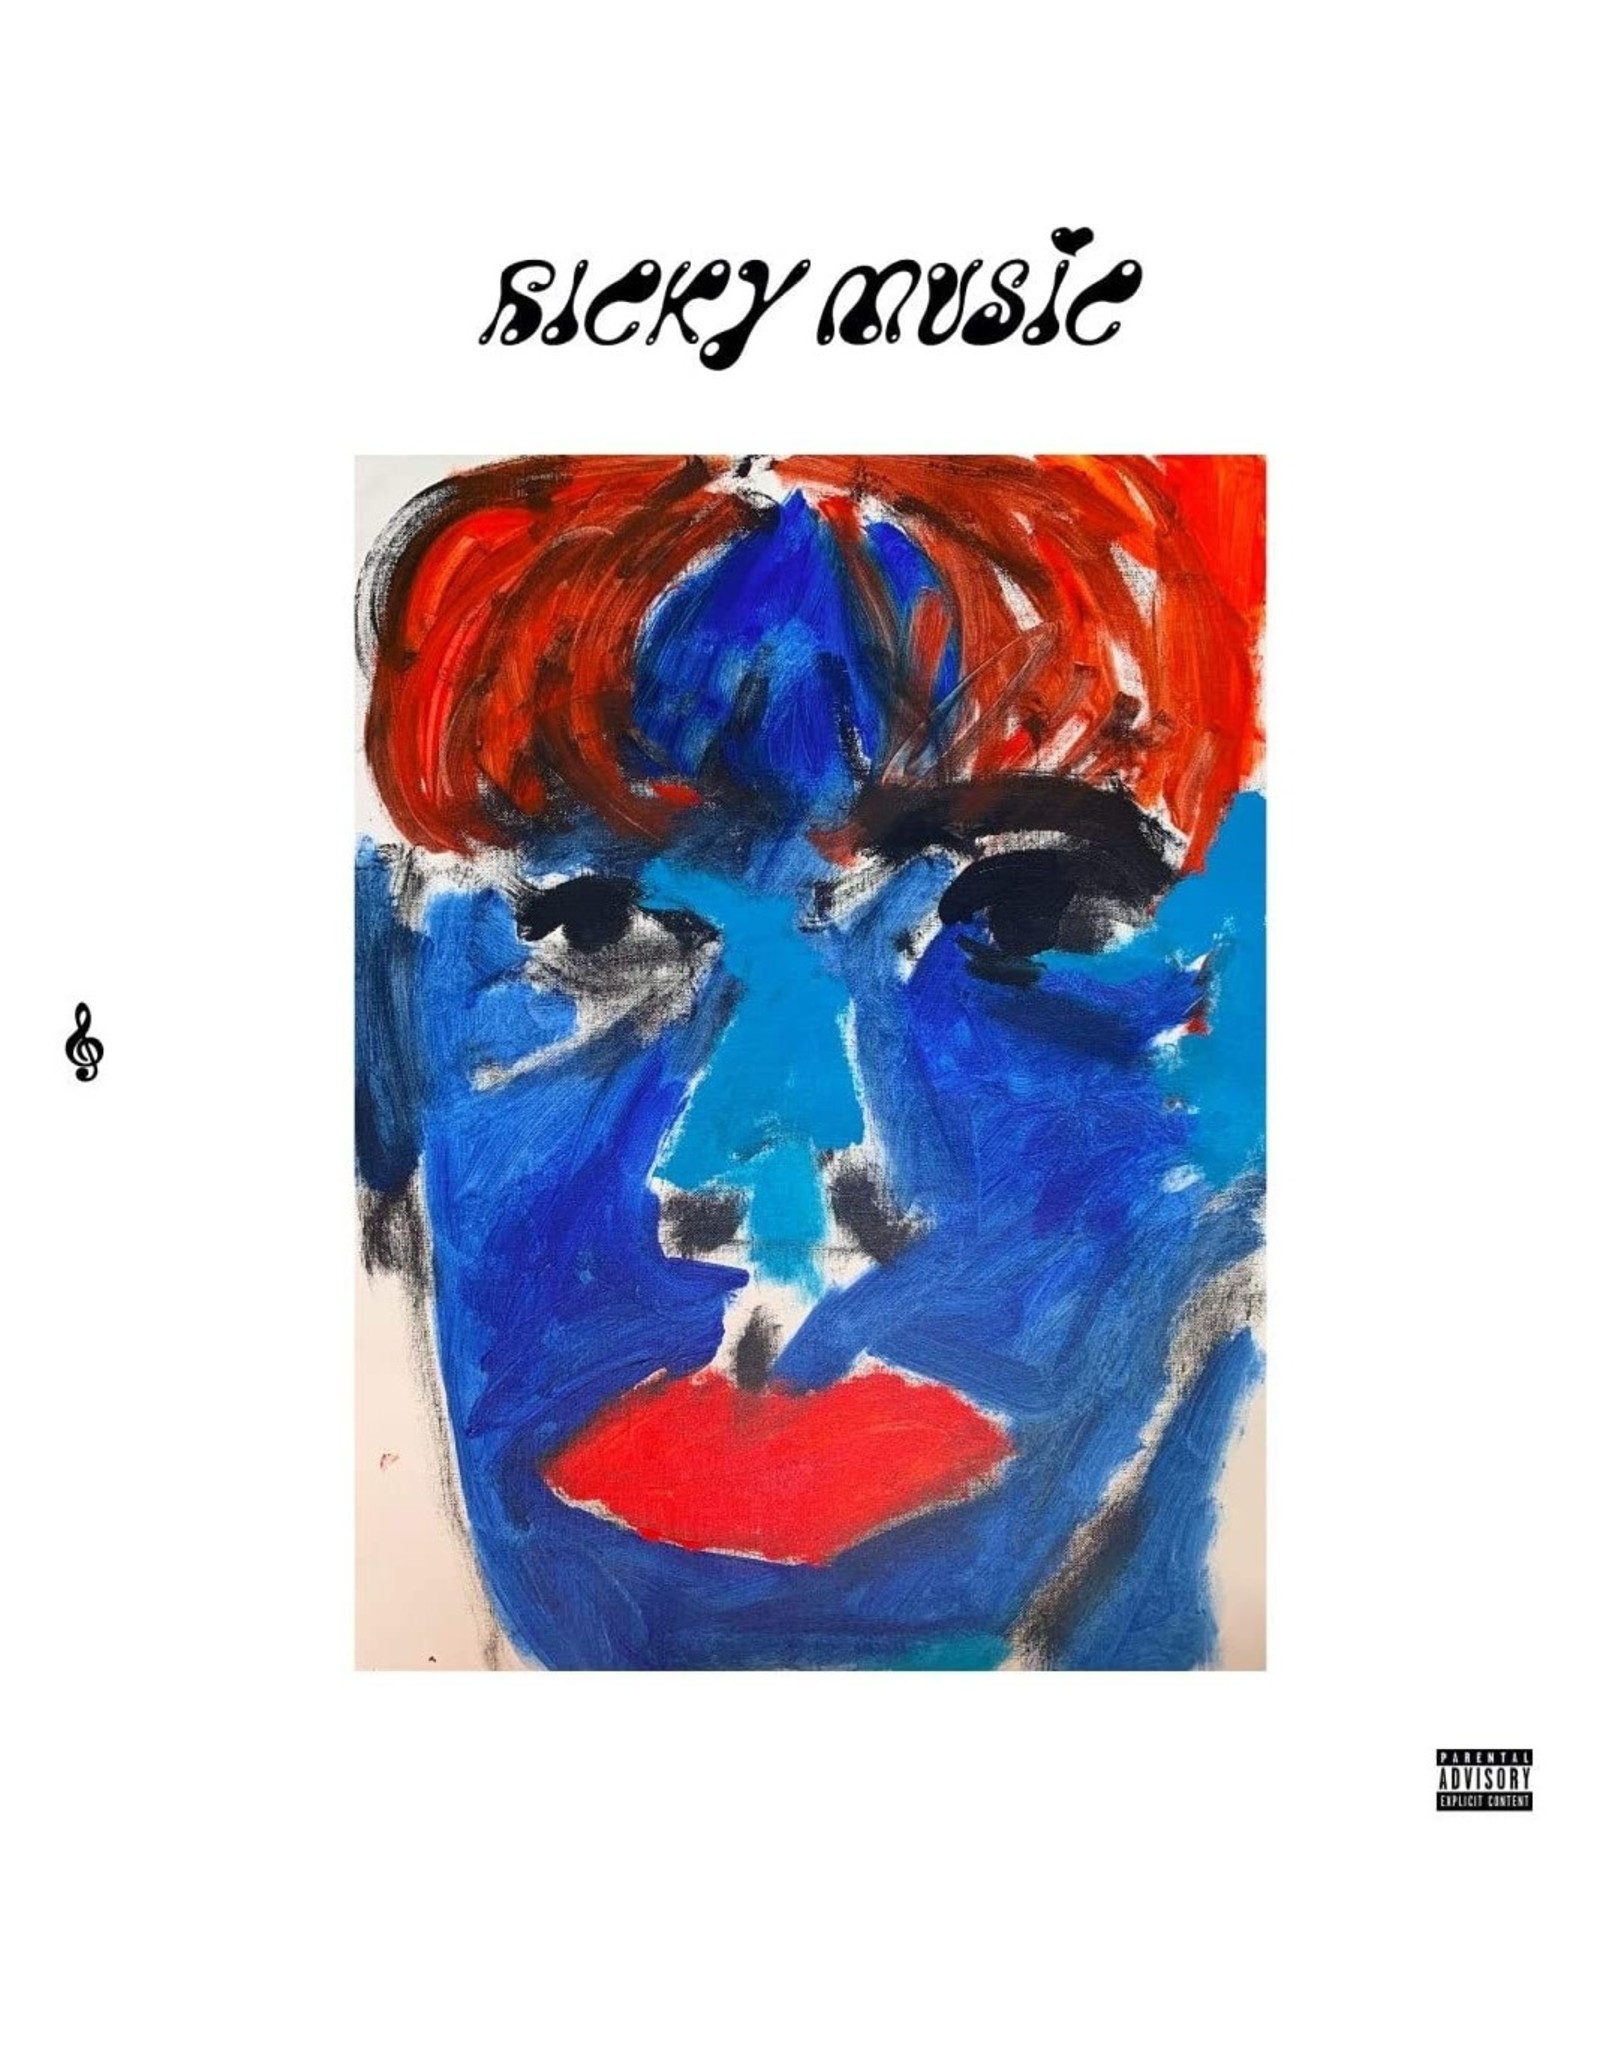 Porches - Ricky Music (Exclusive Blue Vinyl)